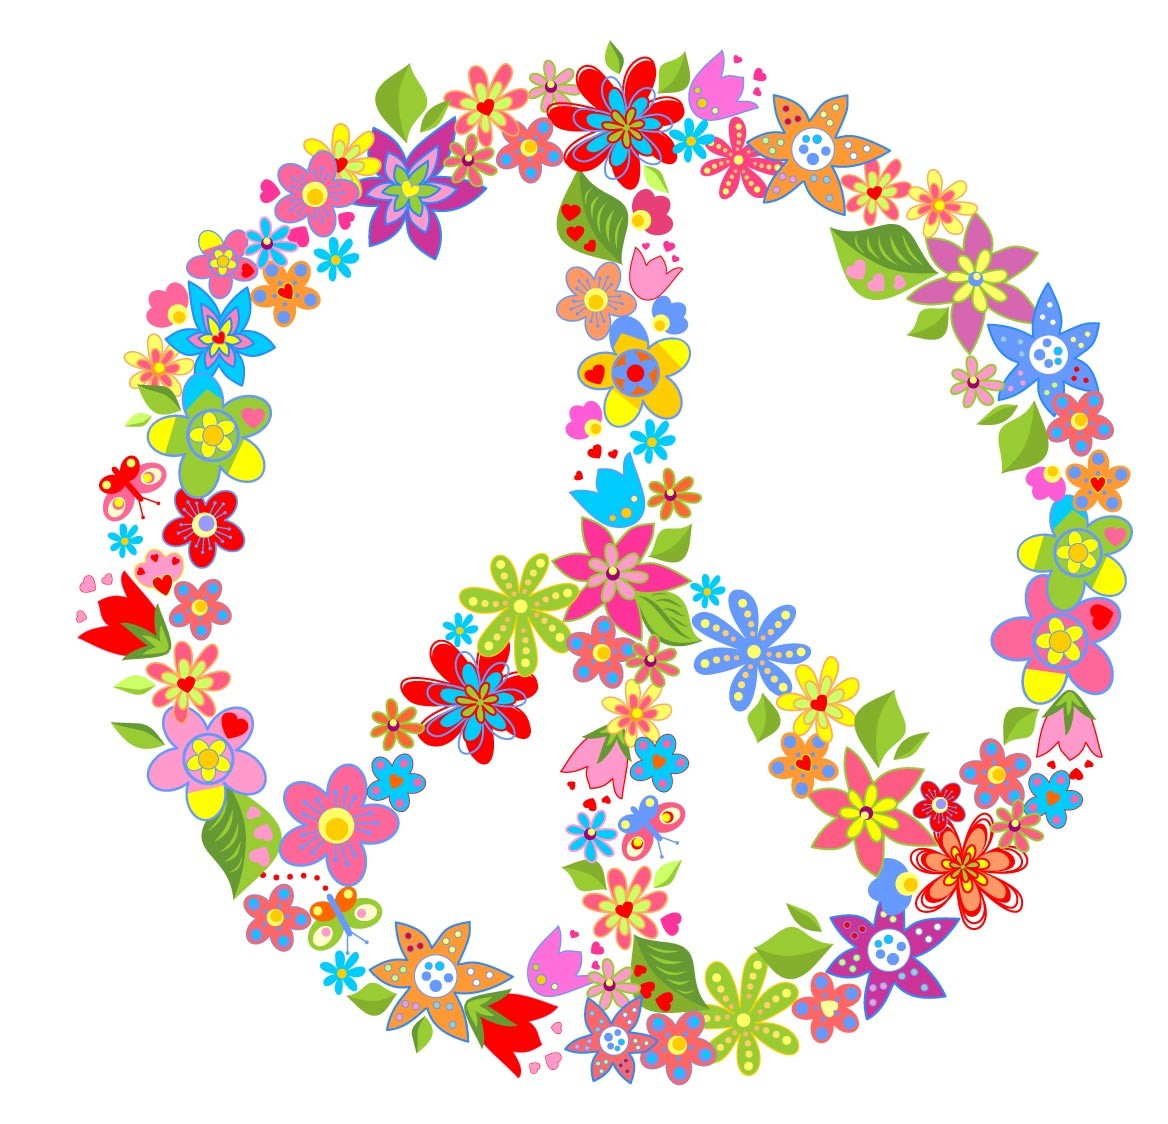 Popular items for floral peace sign 